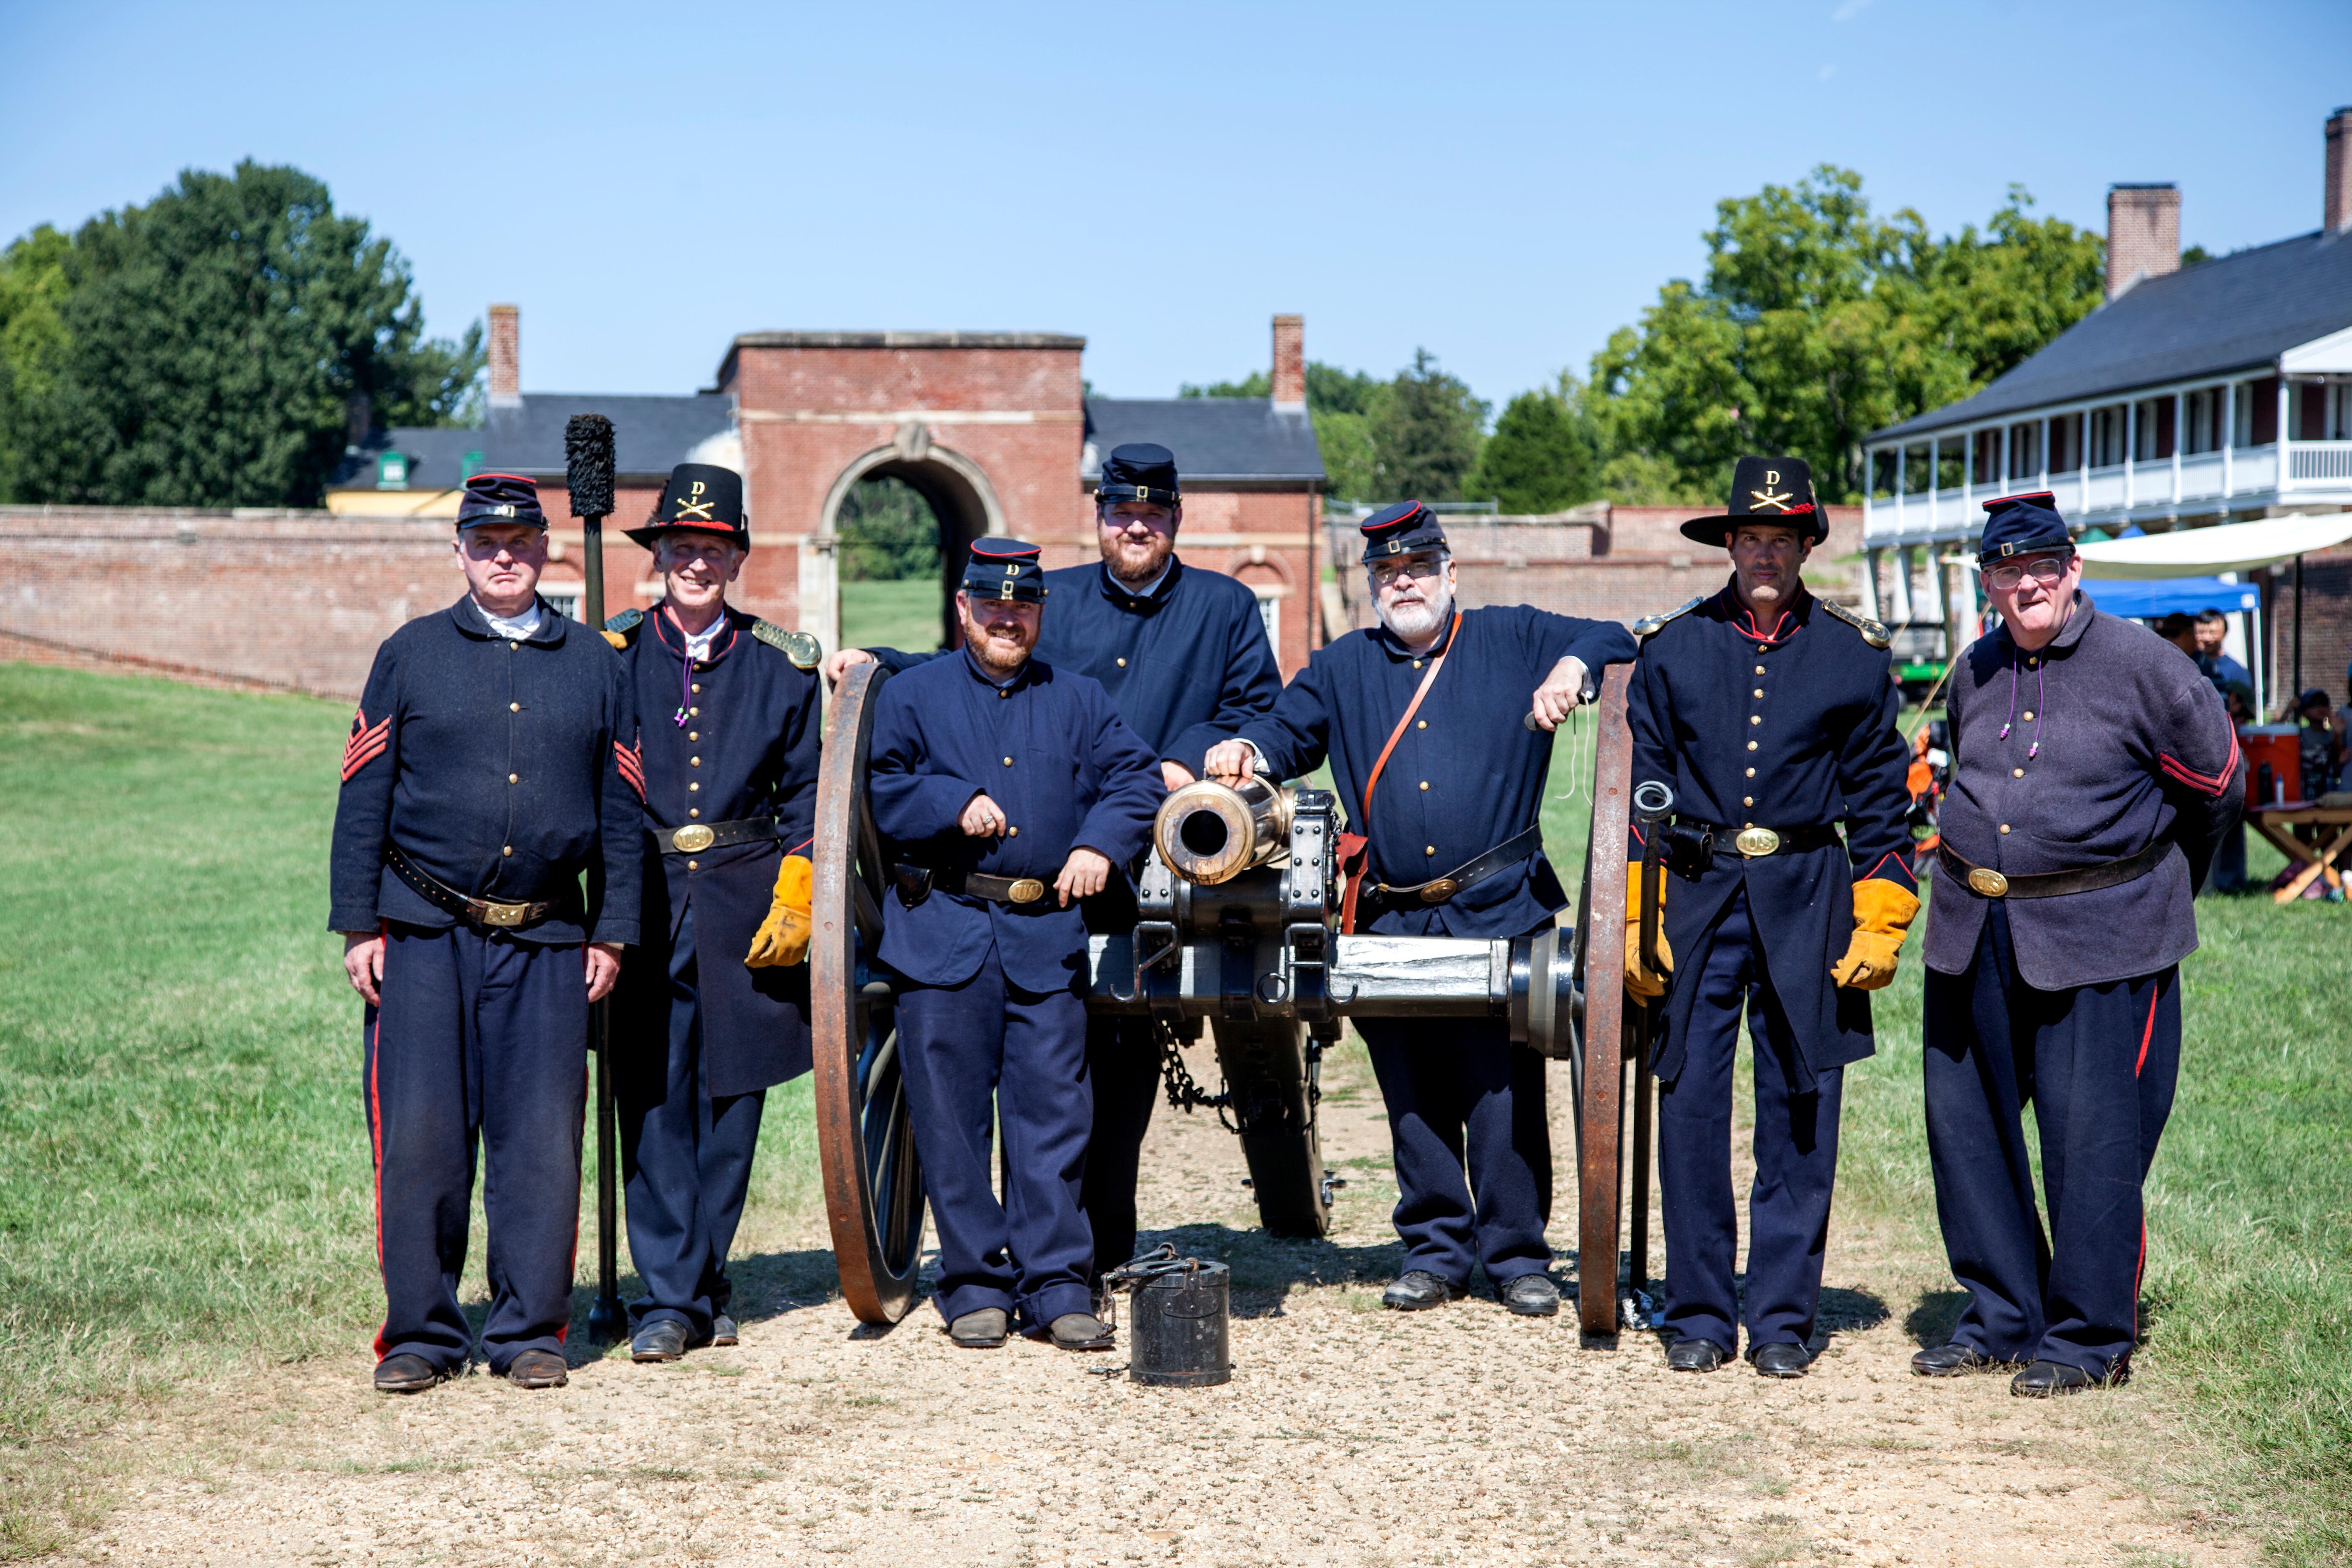 Men in blue army uniforms pose by a cannon.